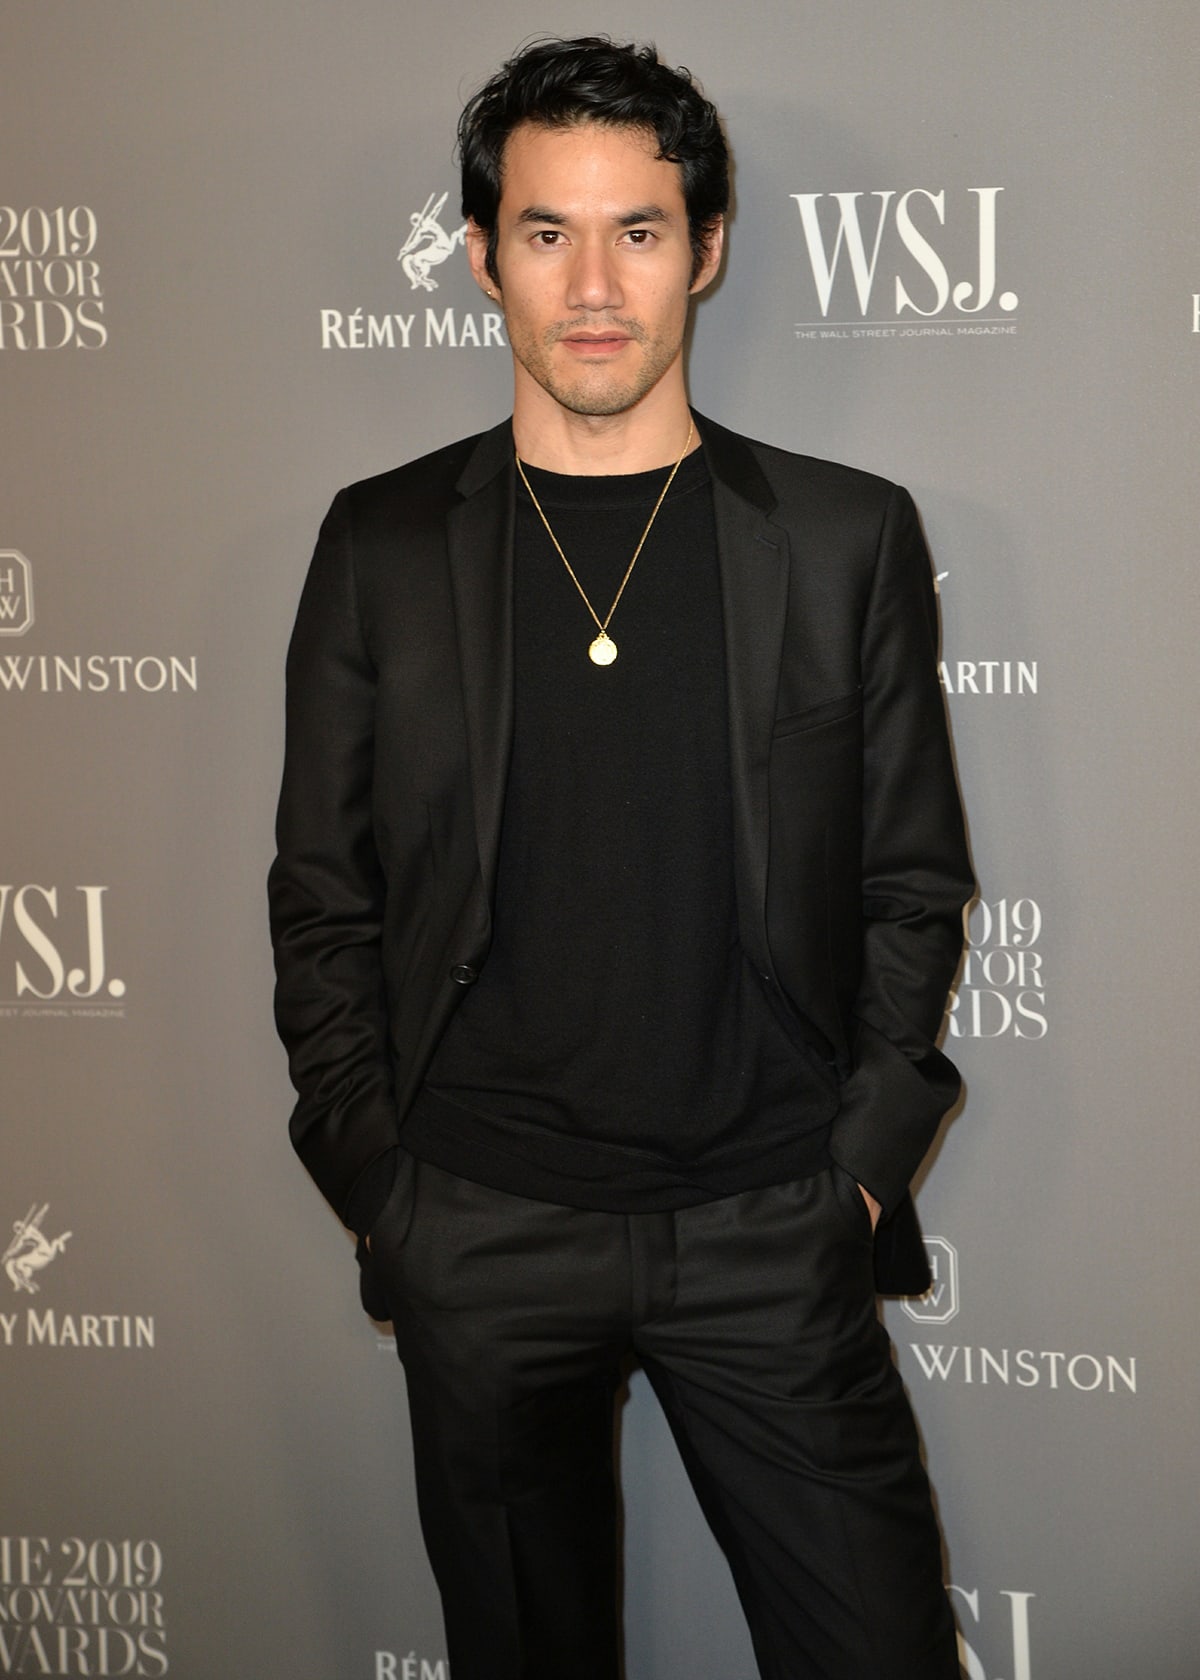 Joseph Altuzarra is regarded as one of the most talented fashion designers of his generation